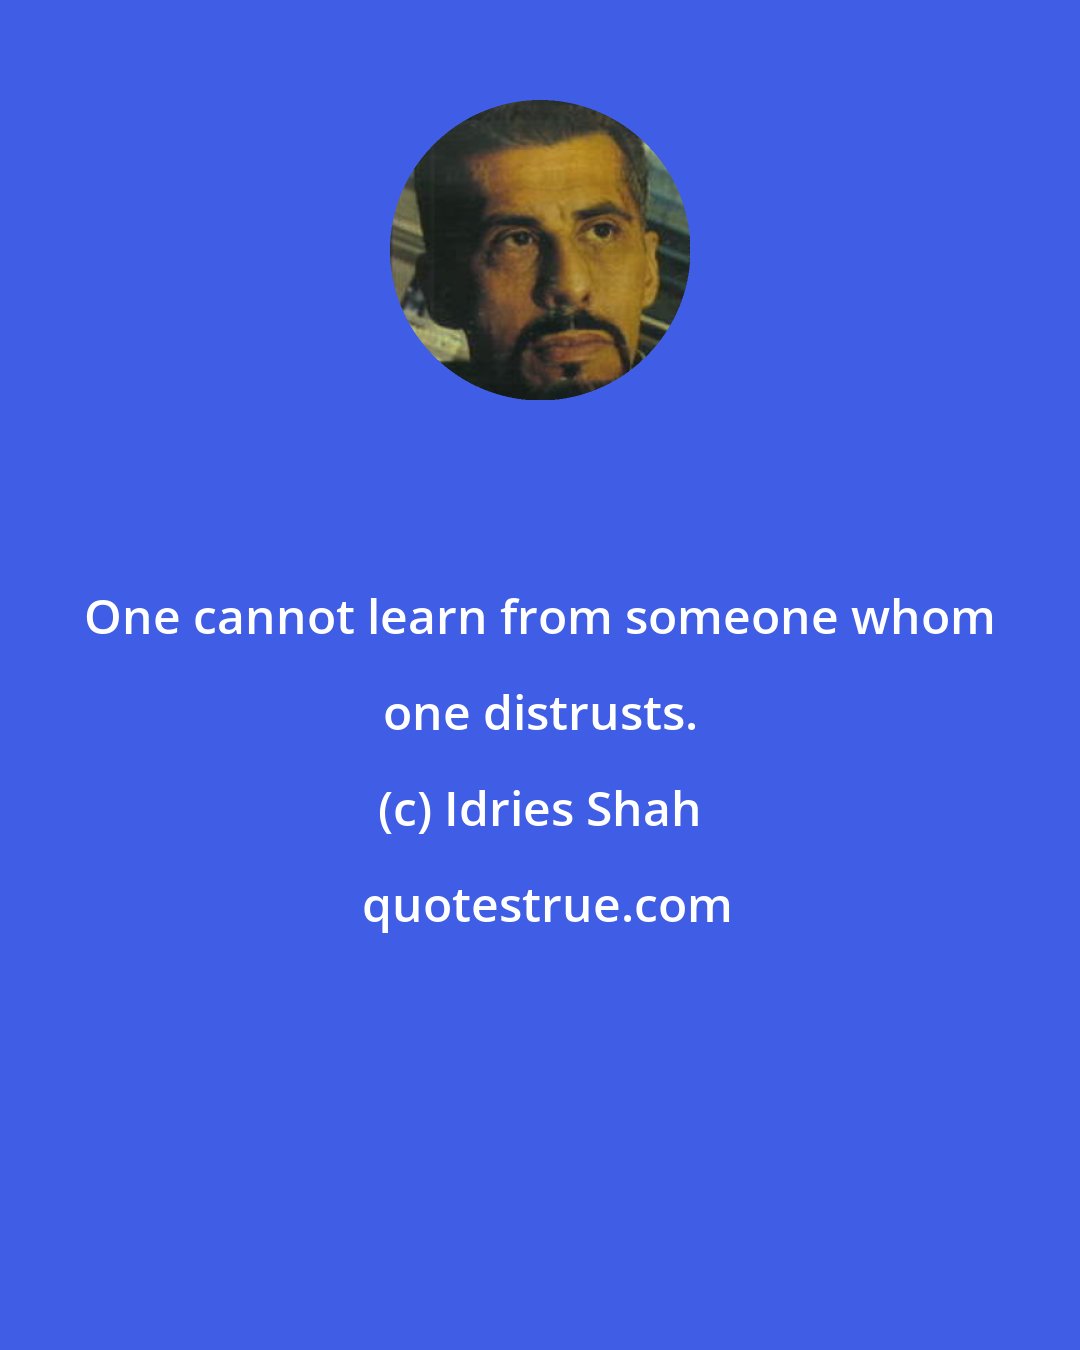 Idries Shah: One cannot learn from someone whom one distrusts.